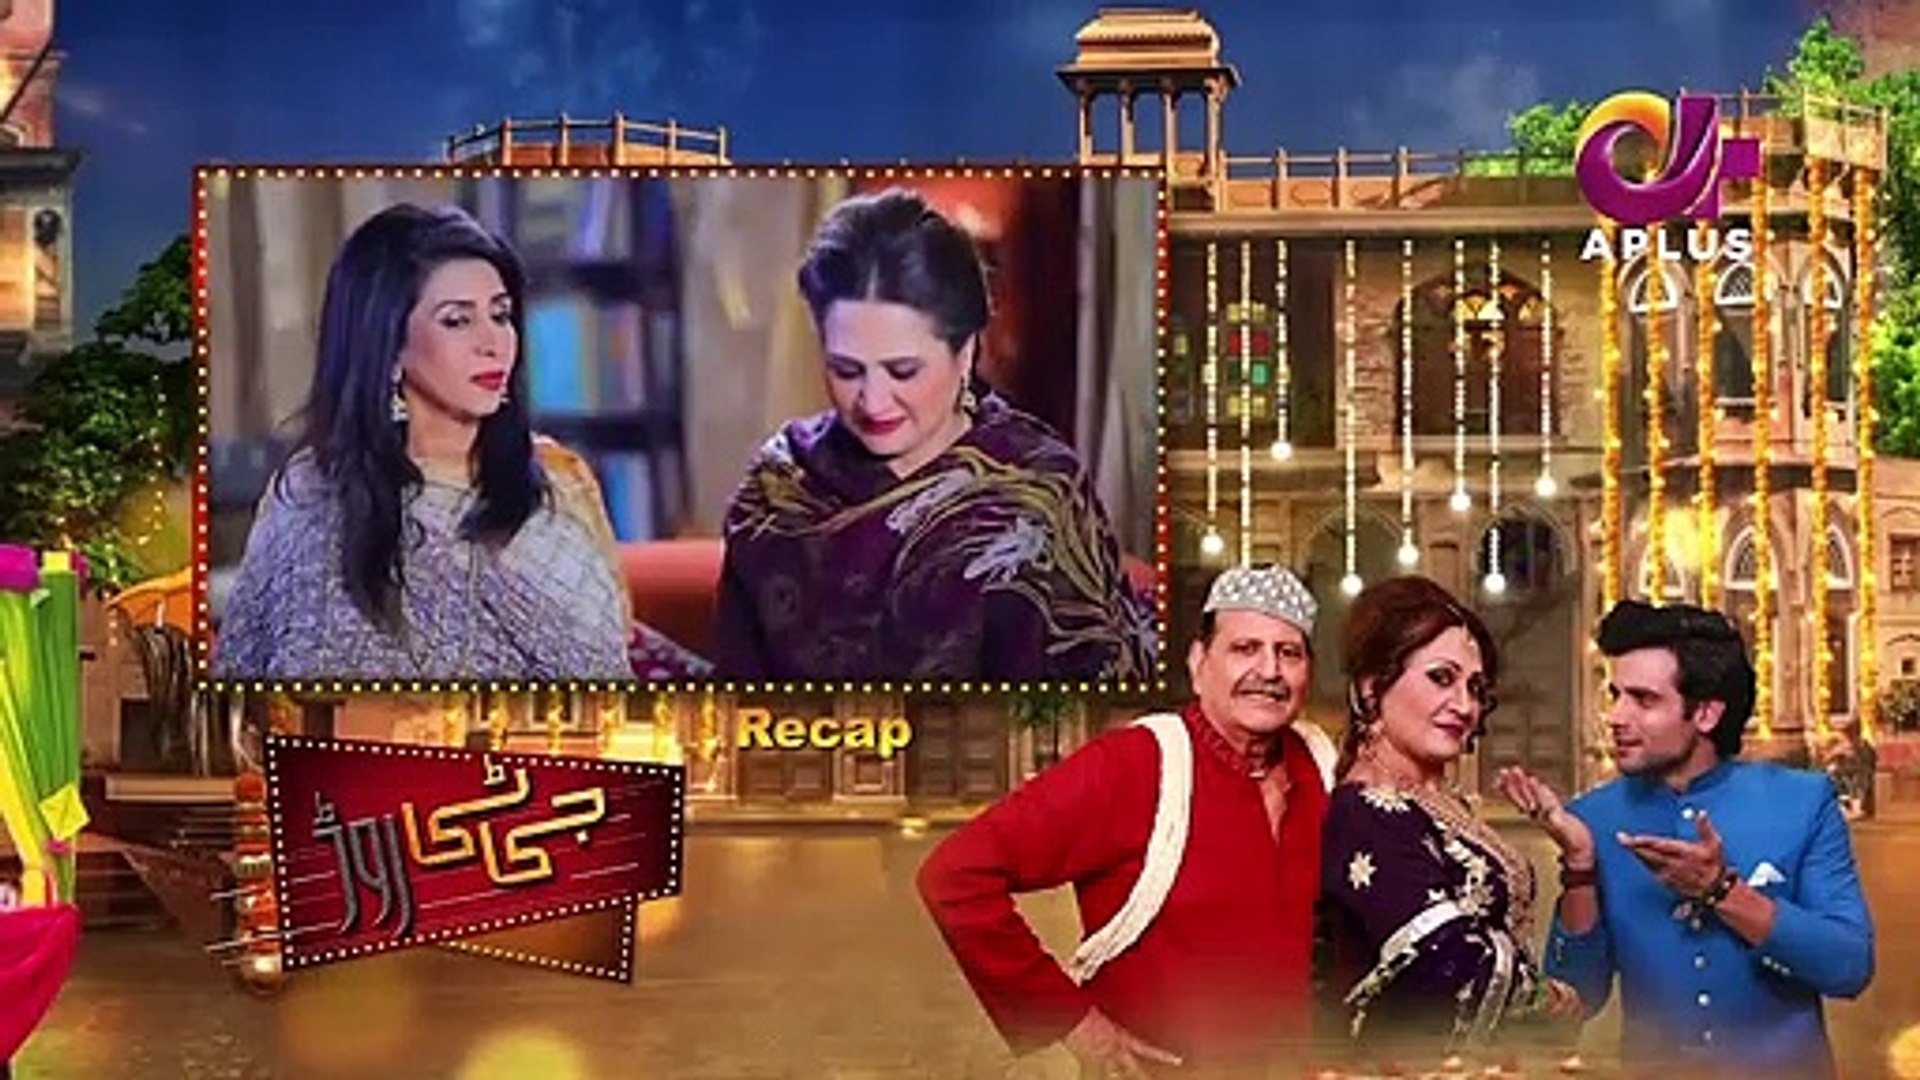 GT Road is a Pakistani drama serial presented by A Plus Entertainment. It's a comedy drama that beautifully depicts the bond between a brother and sister. Here We Present Pakistani Drama GT Road Cast, Story, and Release Date.